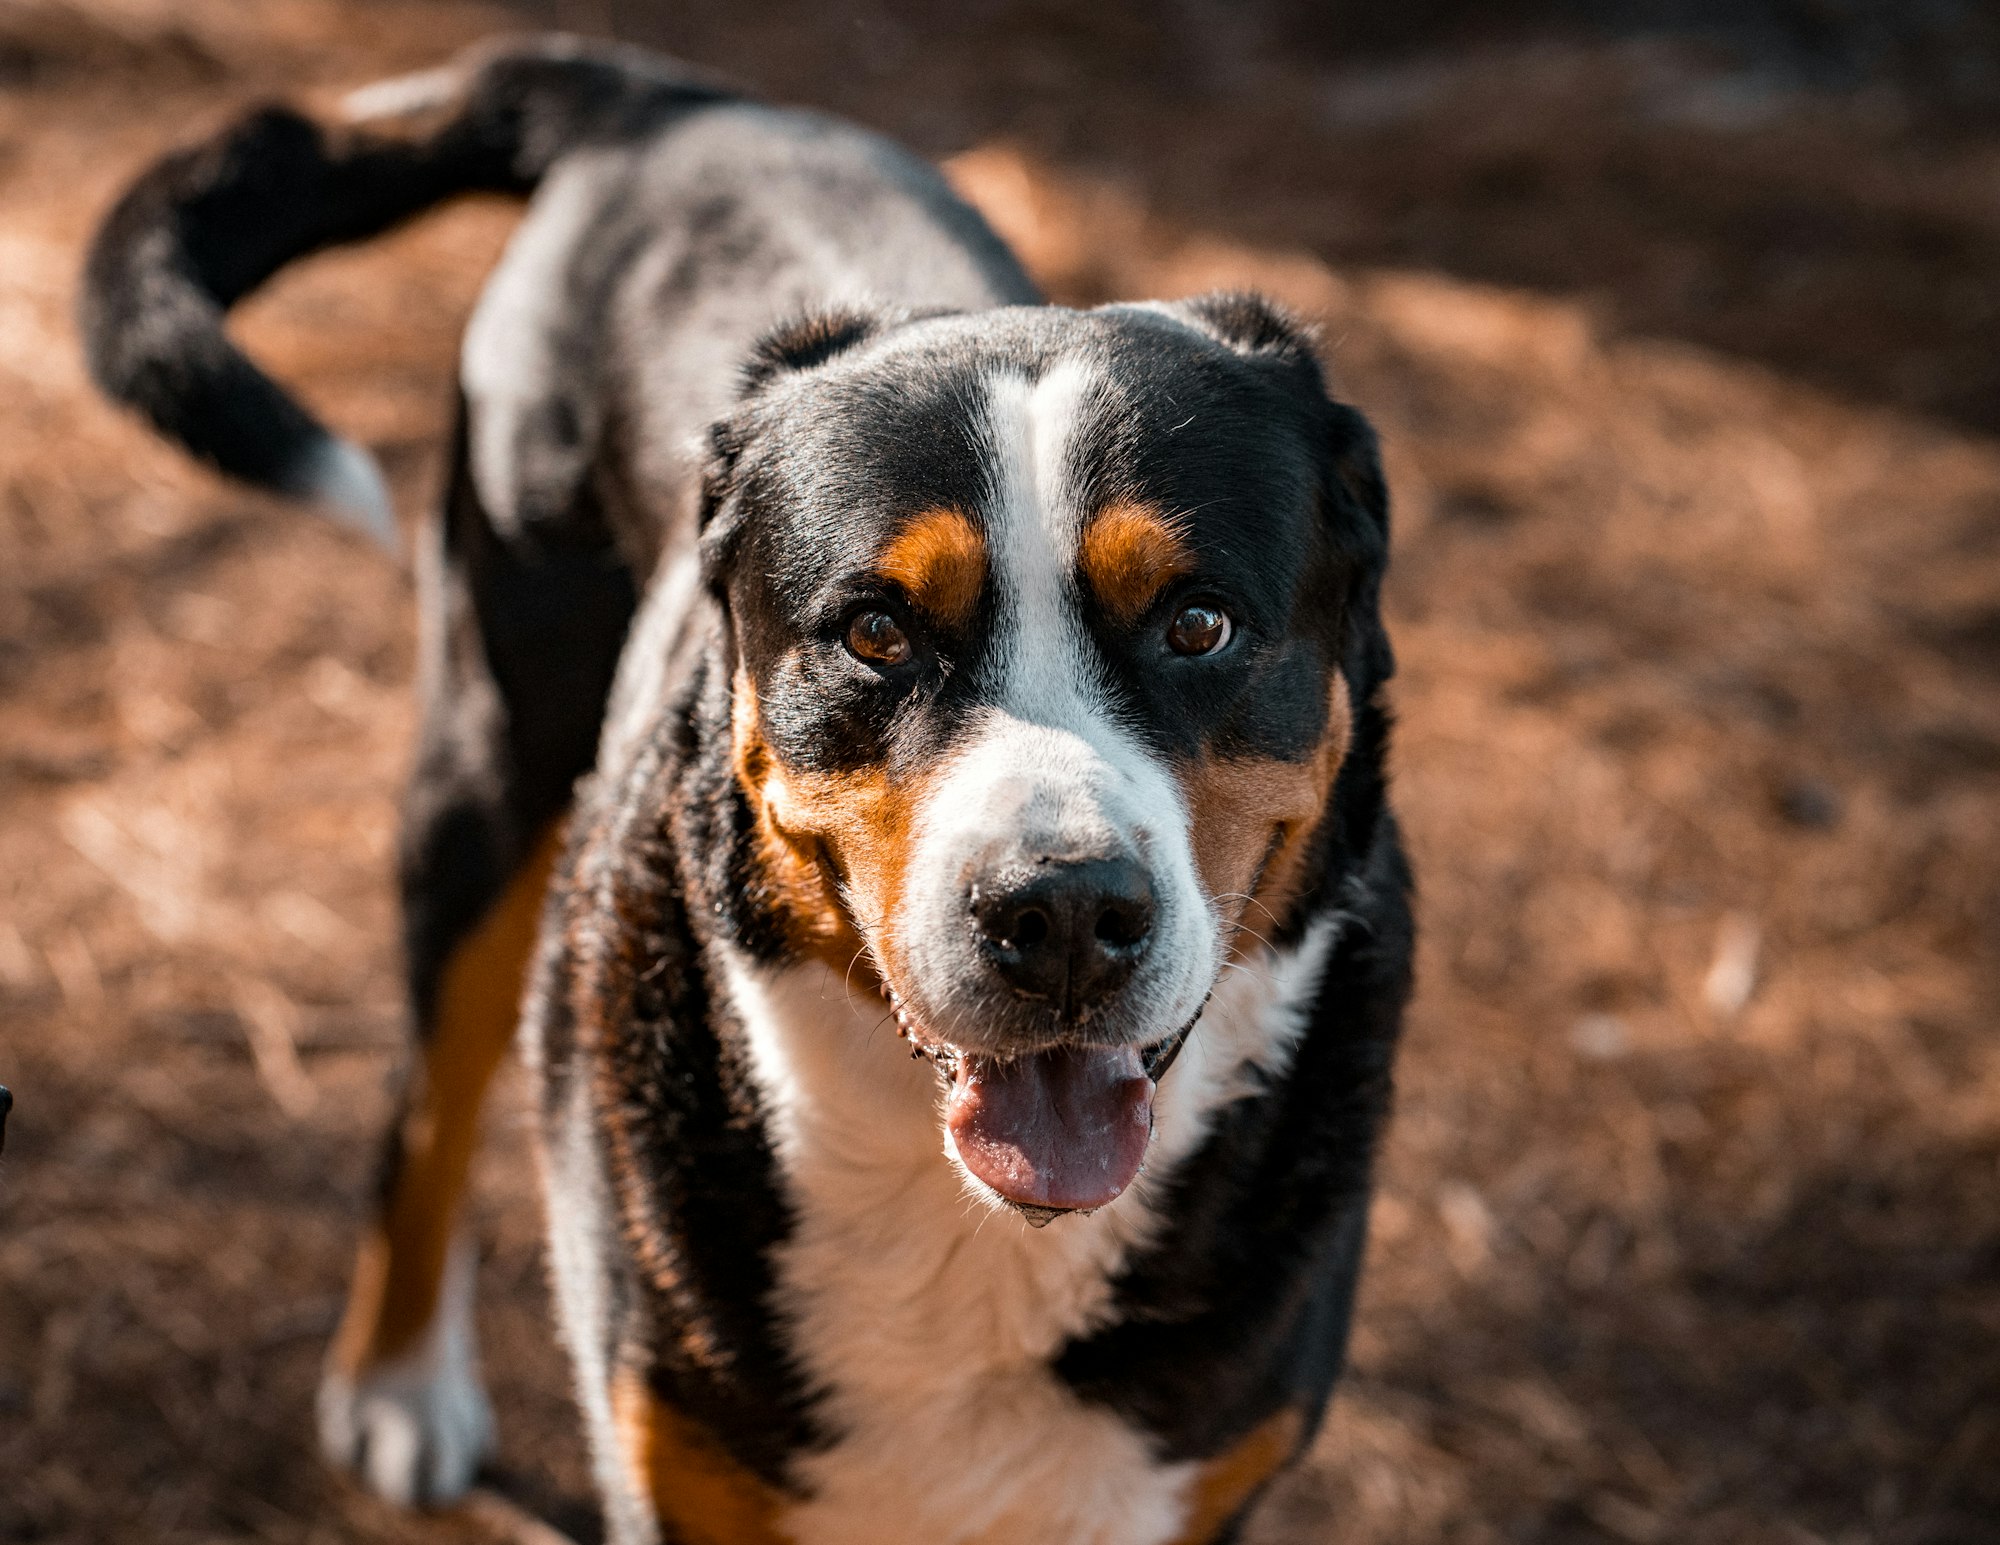 Greater Swiss Mountain Dog in a forest